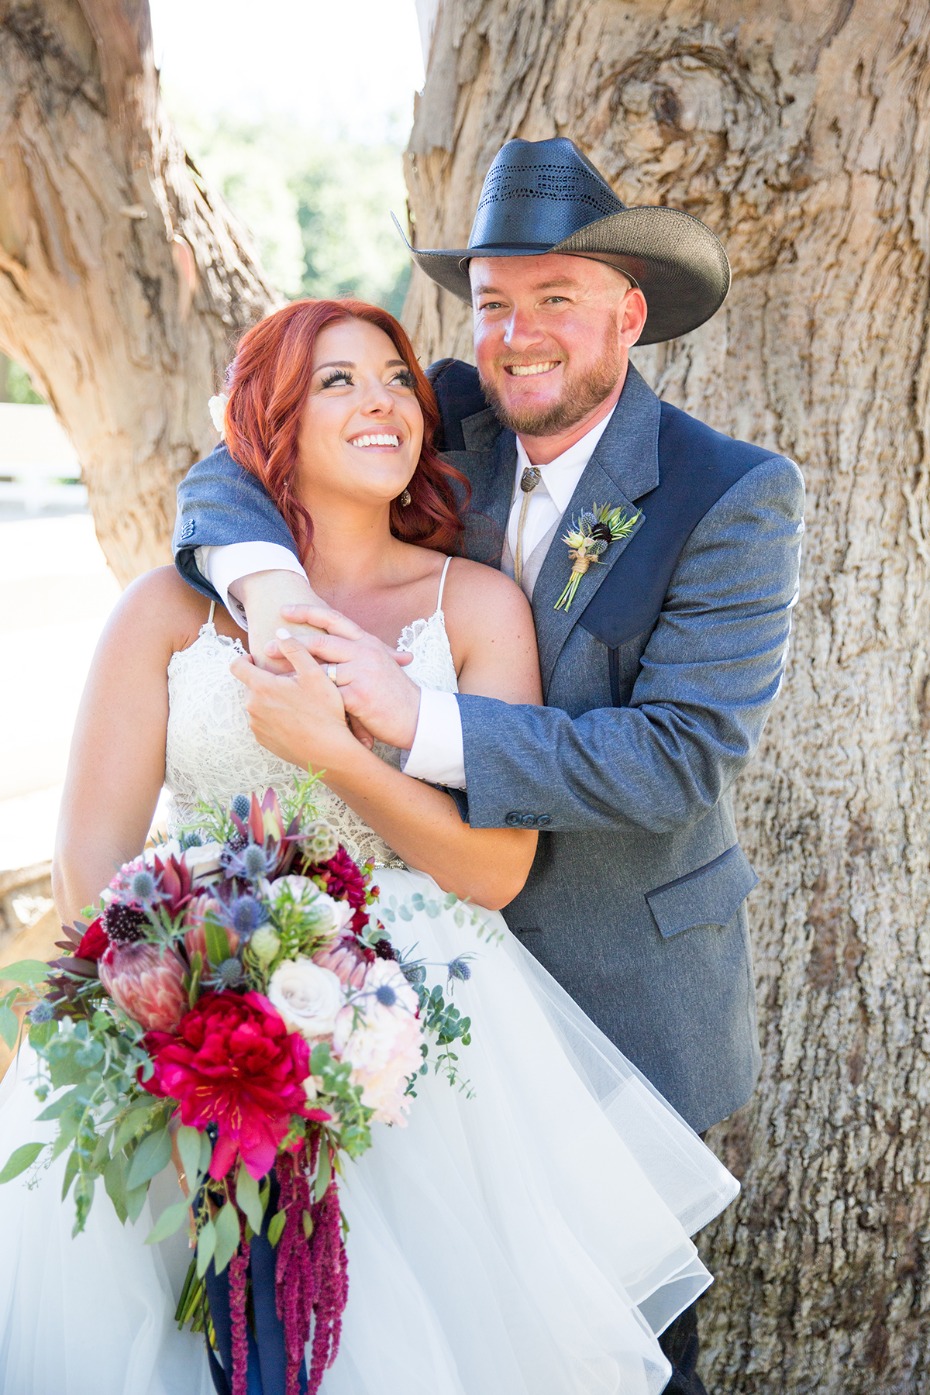 classic country wedding couple style